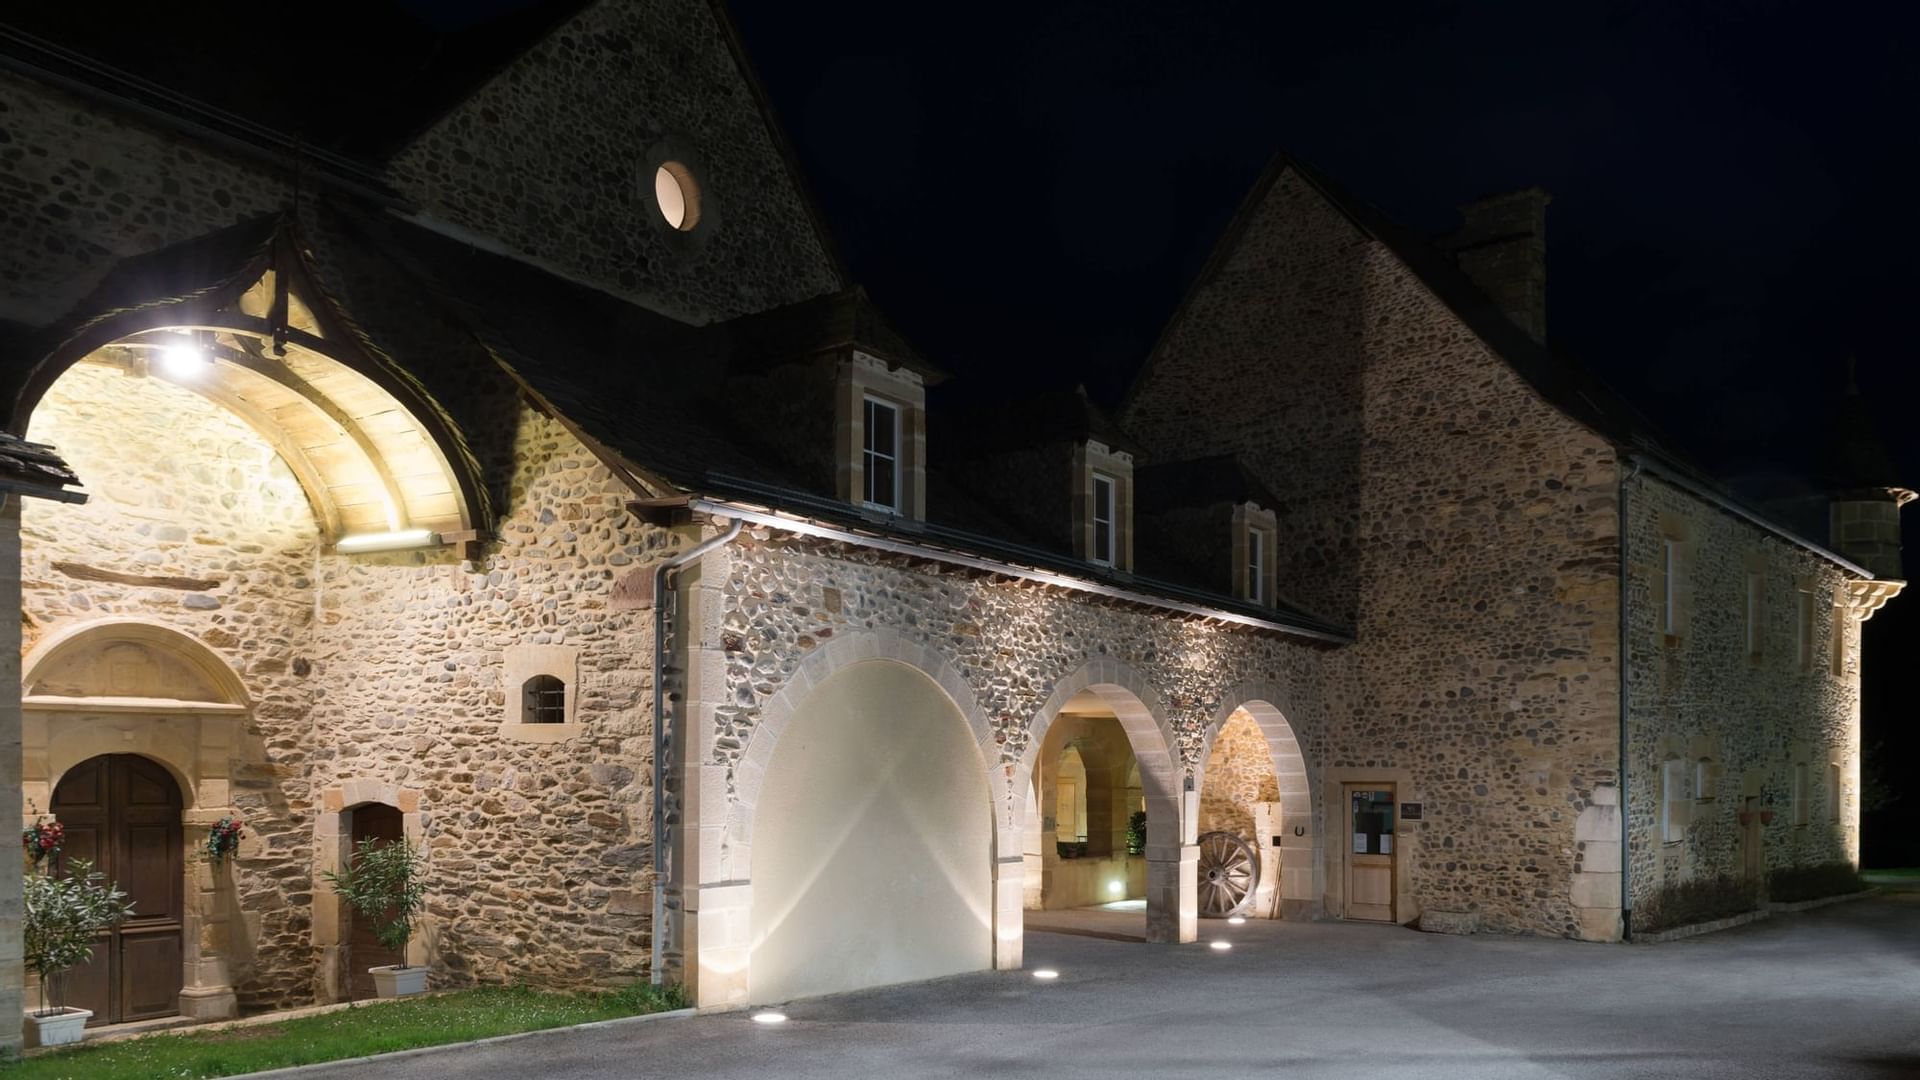 The exterior of the Chateau de la Falque at night time